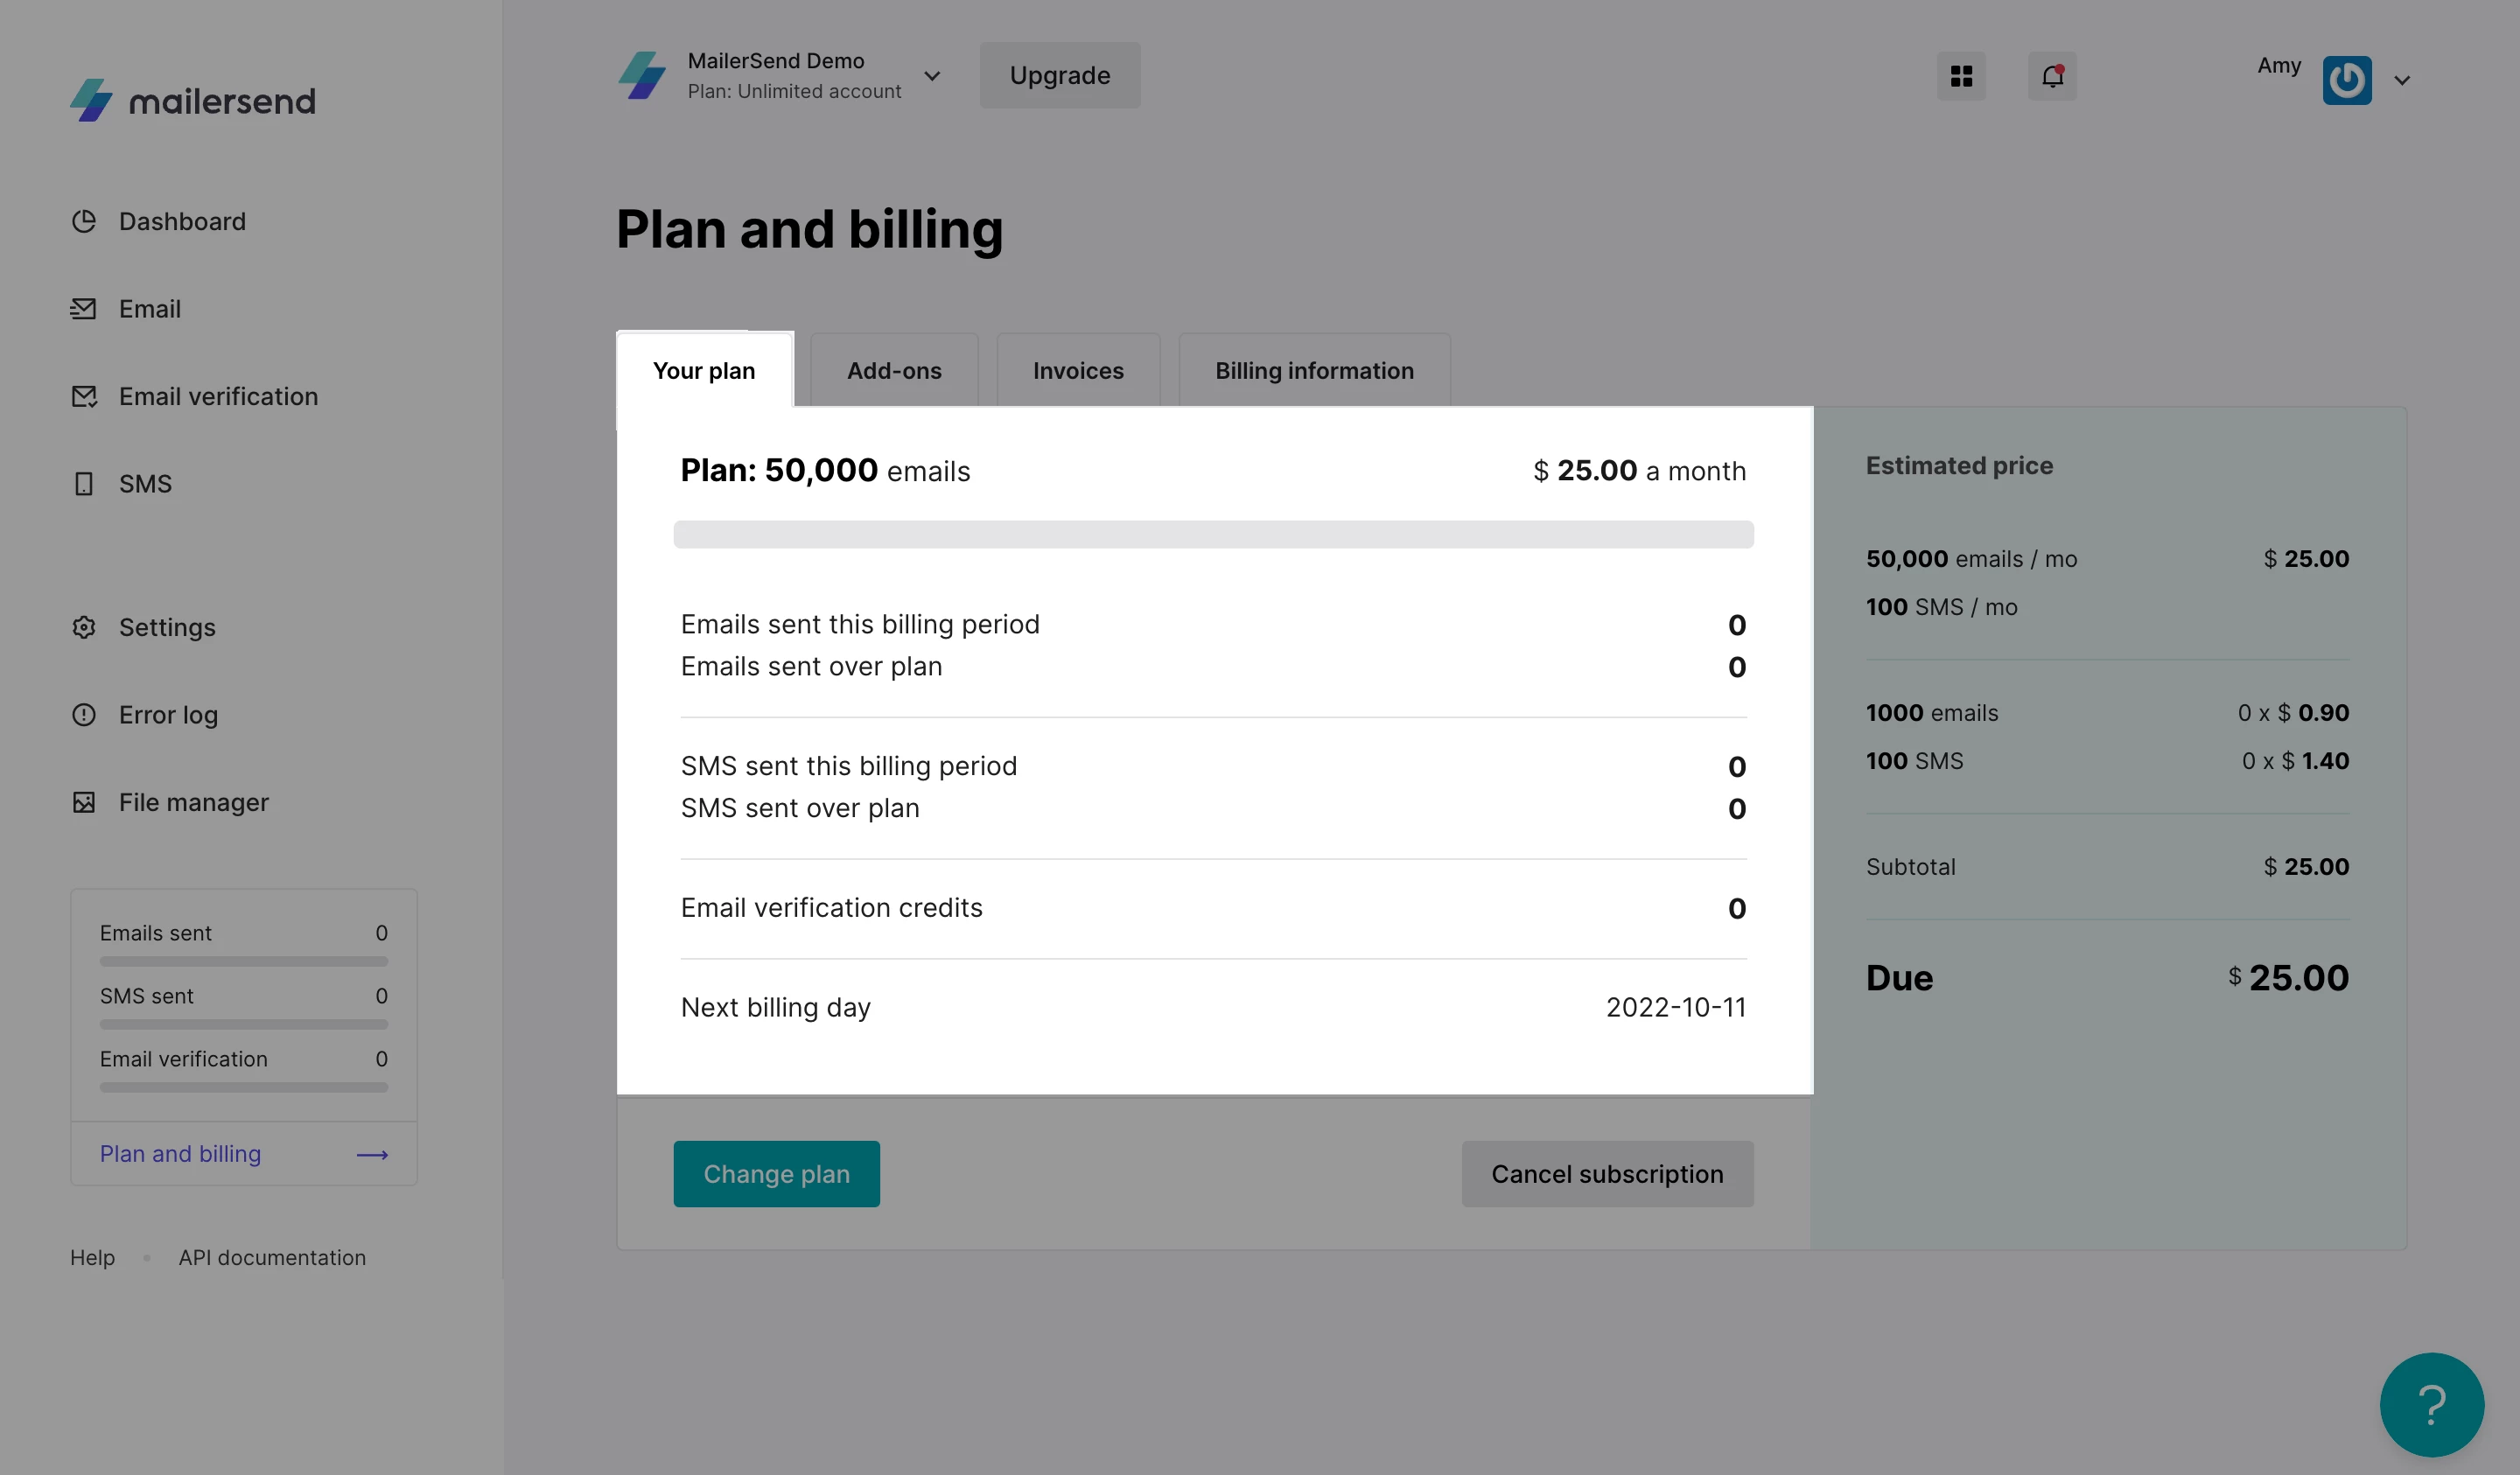 Plan and billing page with details about your plan. 